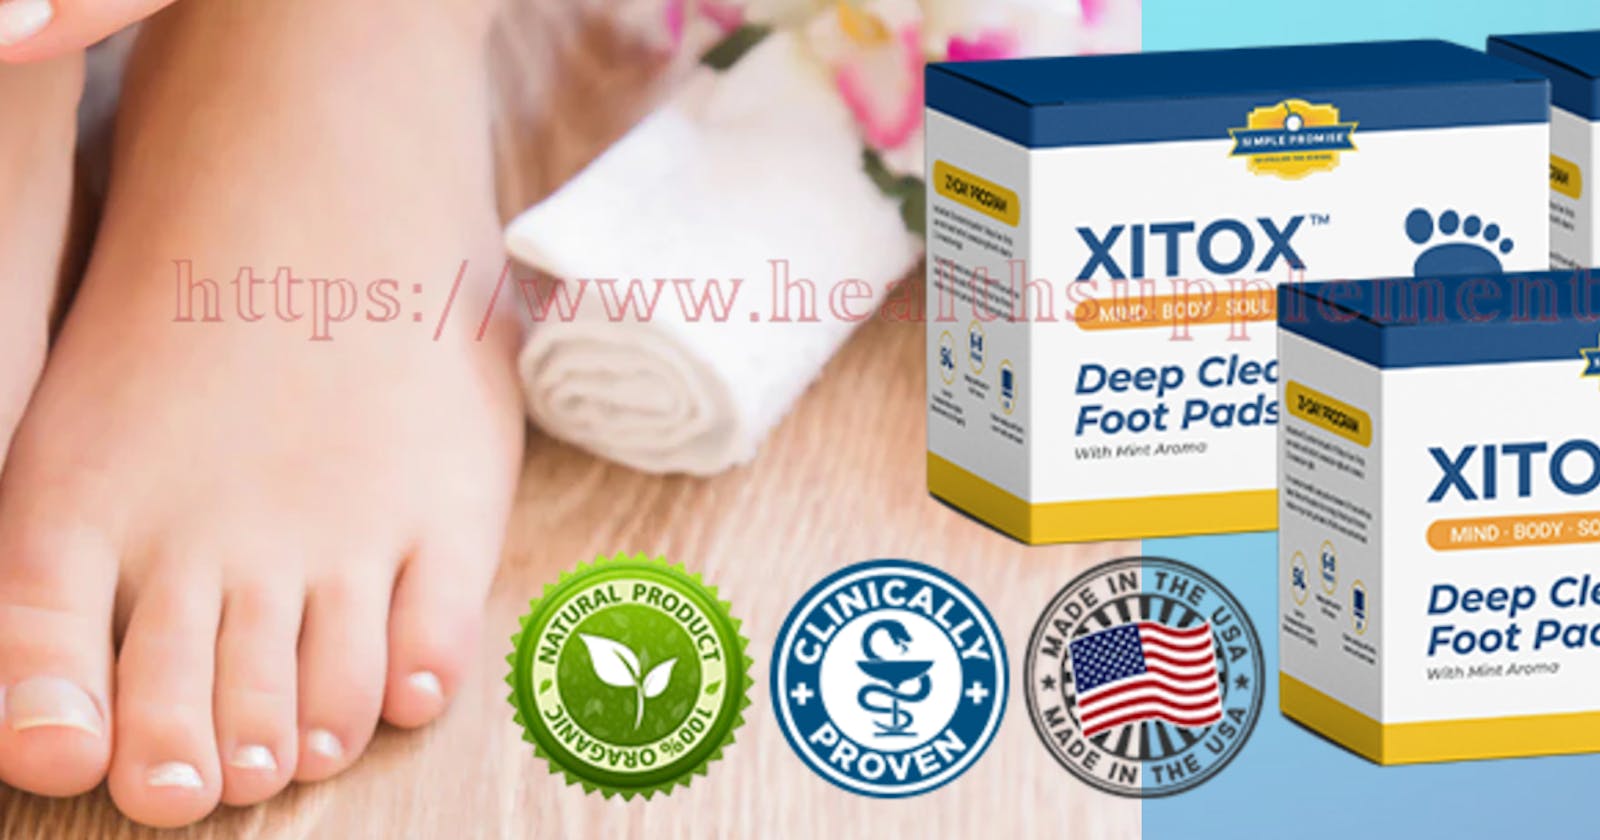 Xitox Deep Cleansing Detox Foot Pads Relieving Stress, Improving Circulation, And Promoting Better Sleep(Spam Or Legit)